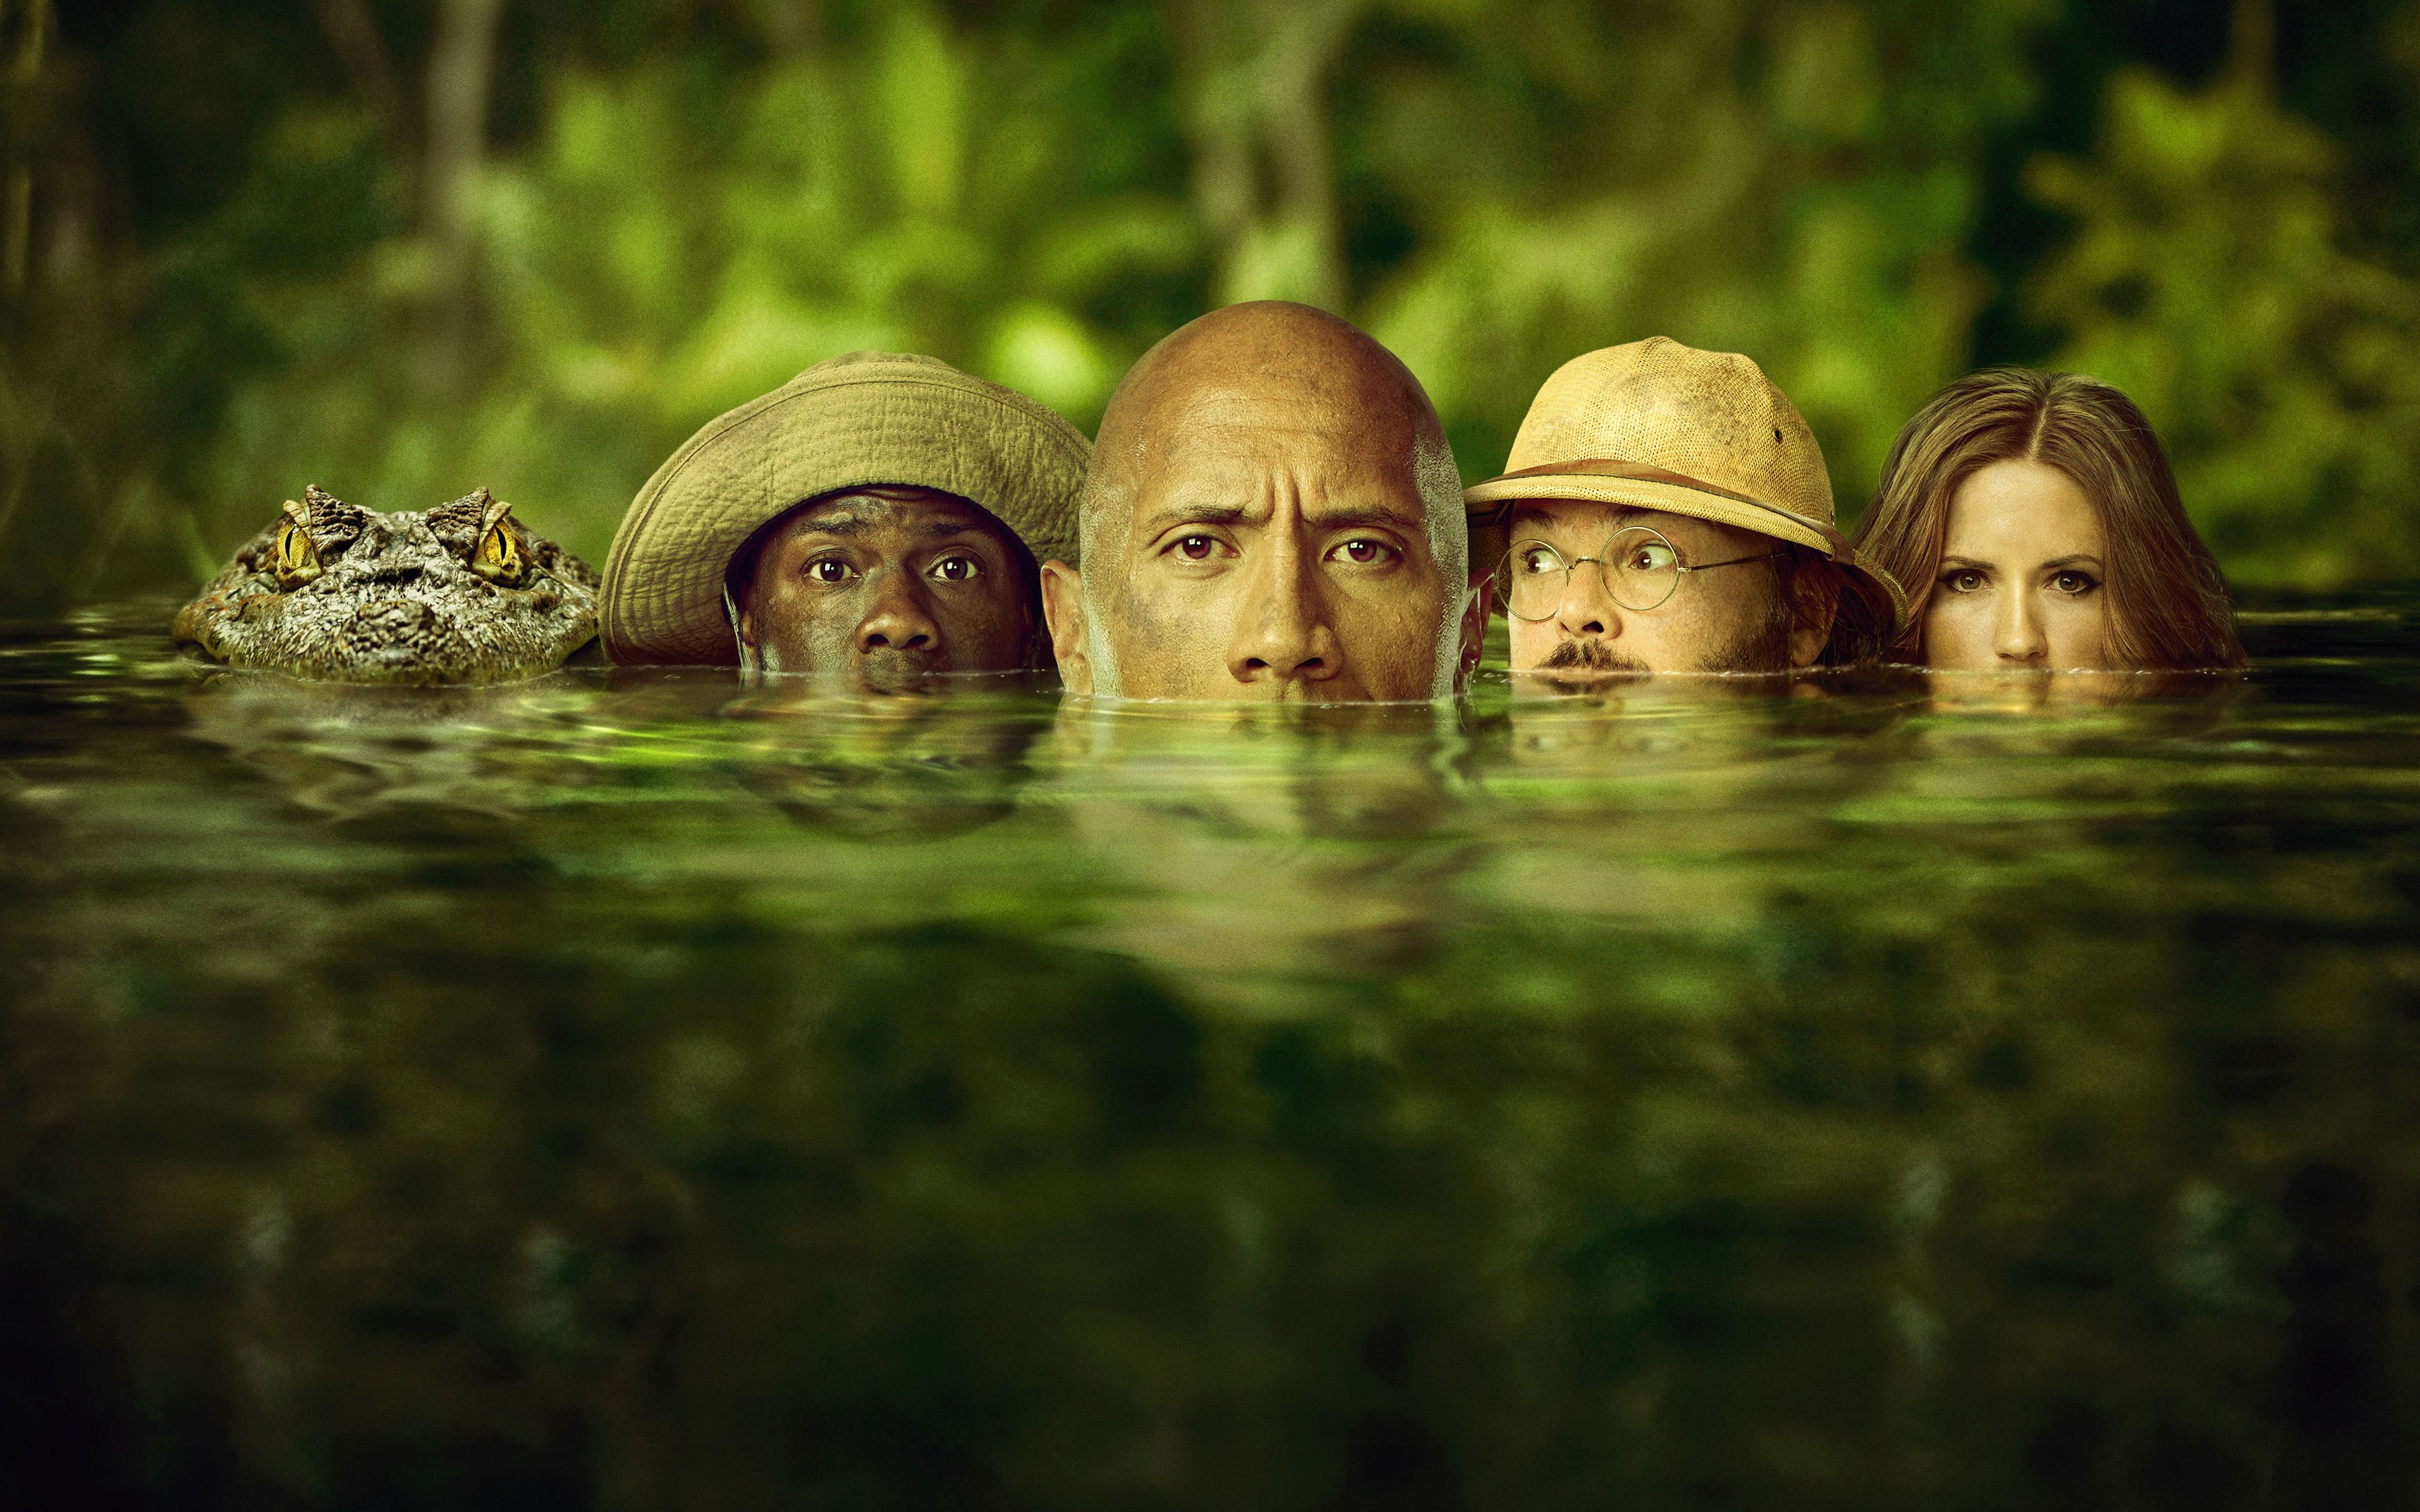 Jumanji Welcome To The Jungle Movie Poster 2017 Wallpapers